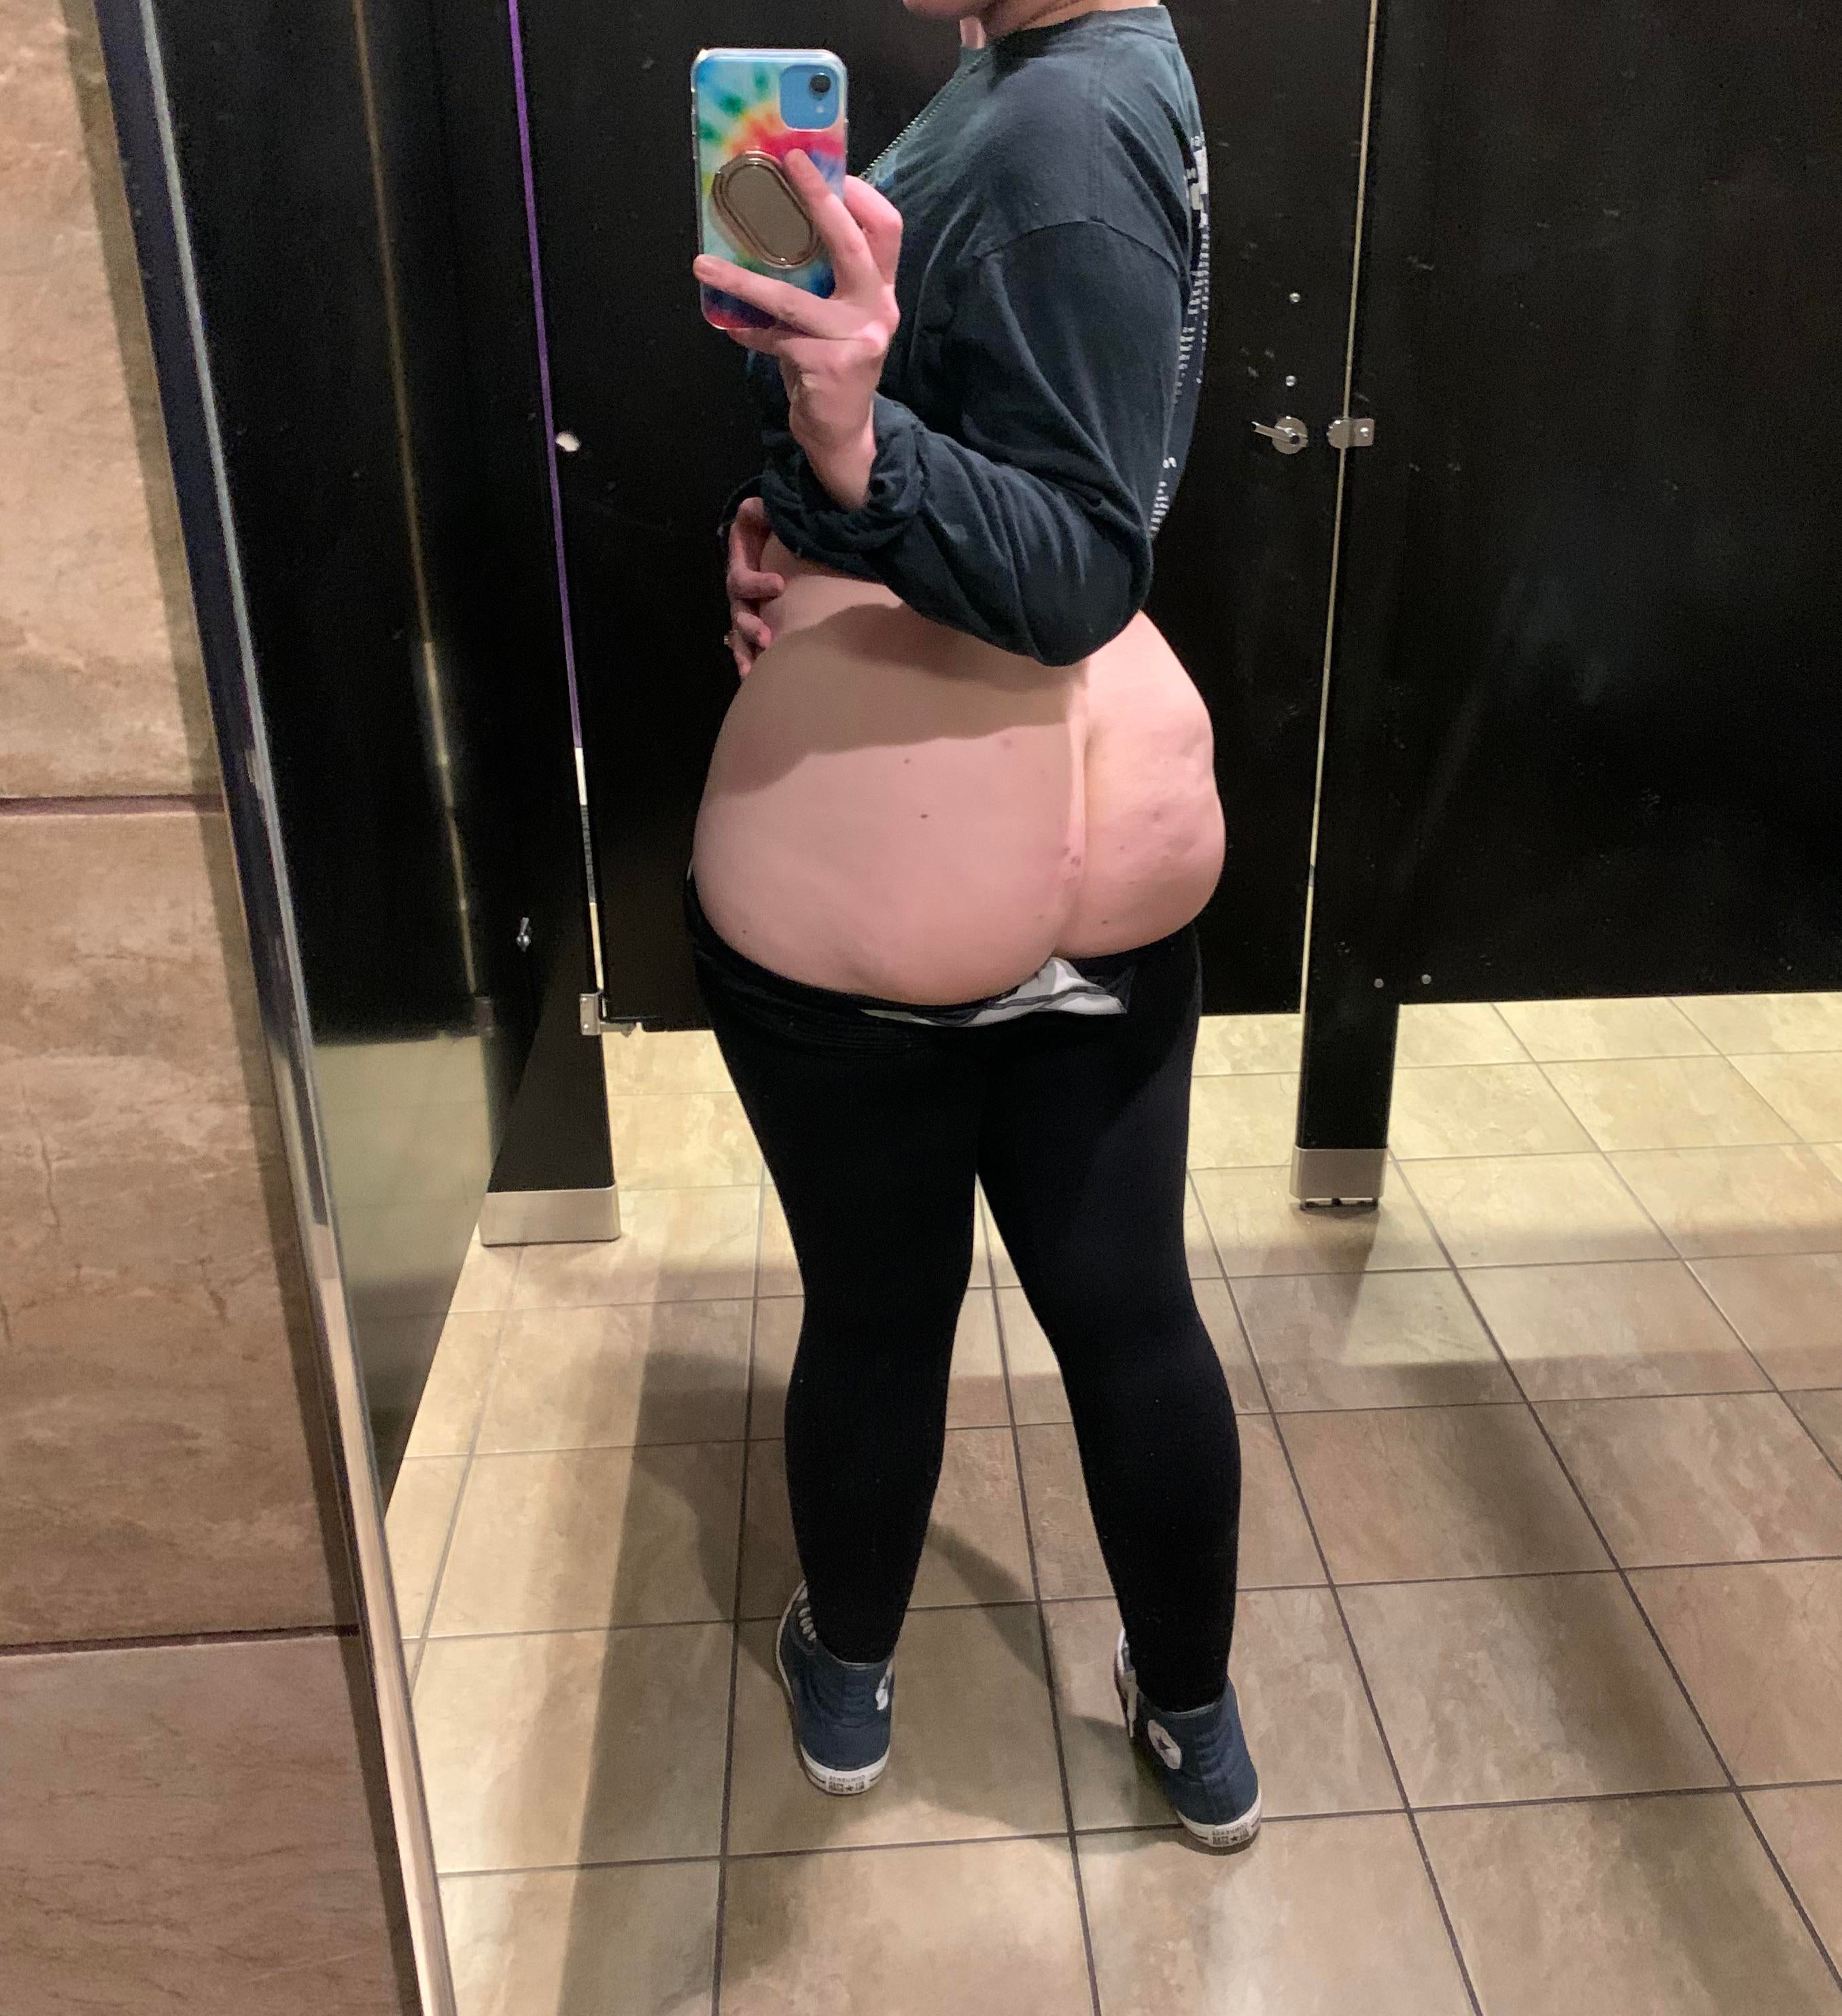 Post gym booty looks extra juicy Thick White Girls